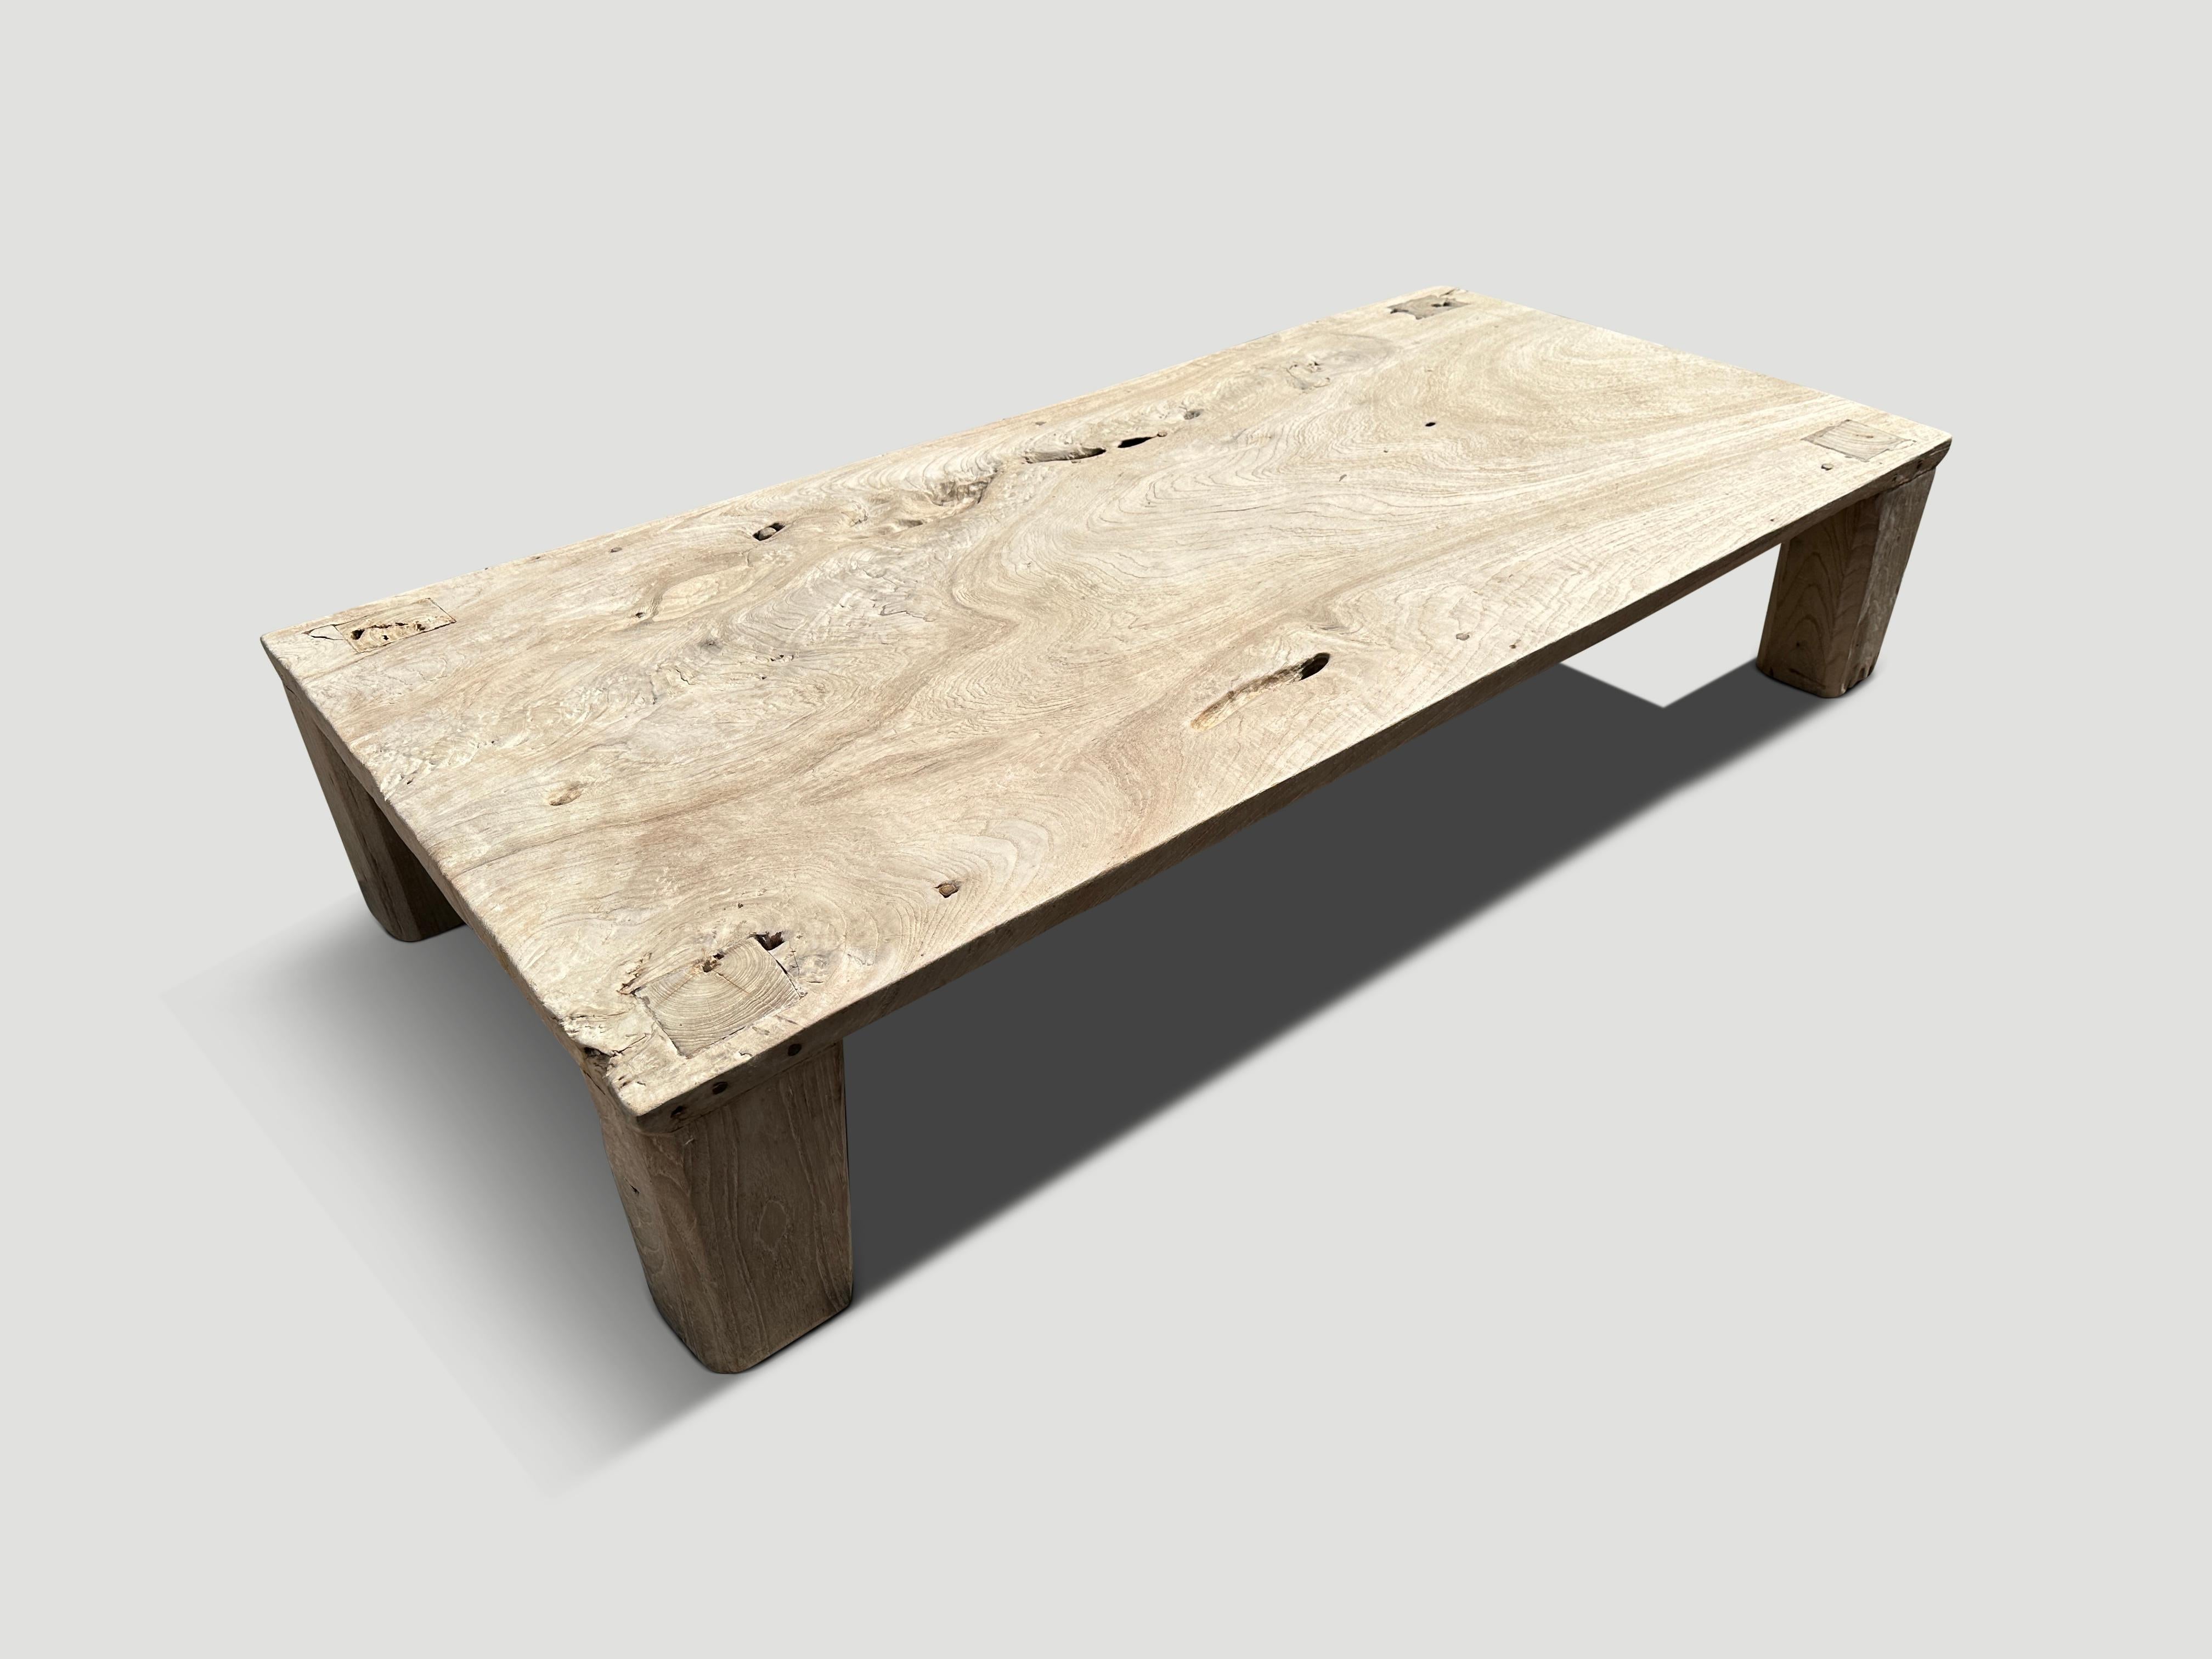 Andrianna Shamaris Minimalist Bleached Teak Wood Coffee Table In Excellent Condition For Sale In New York, NY